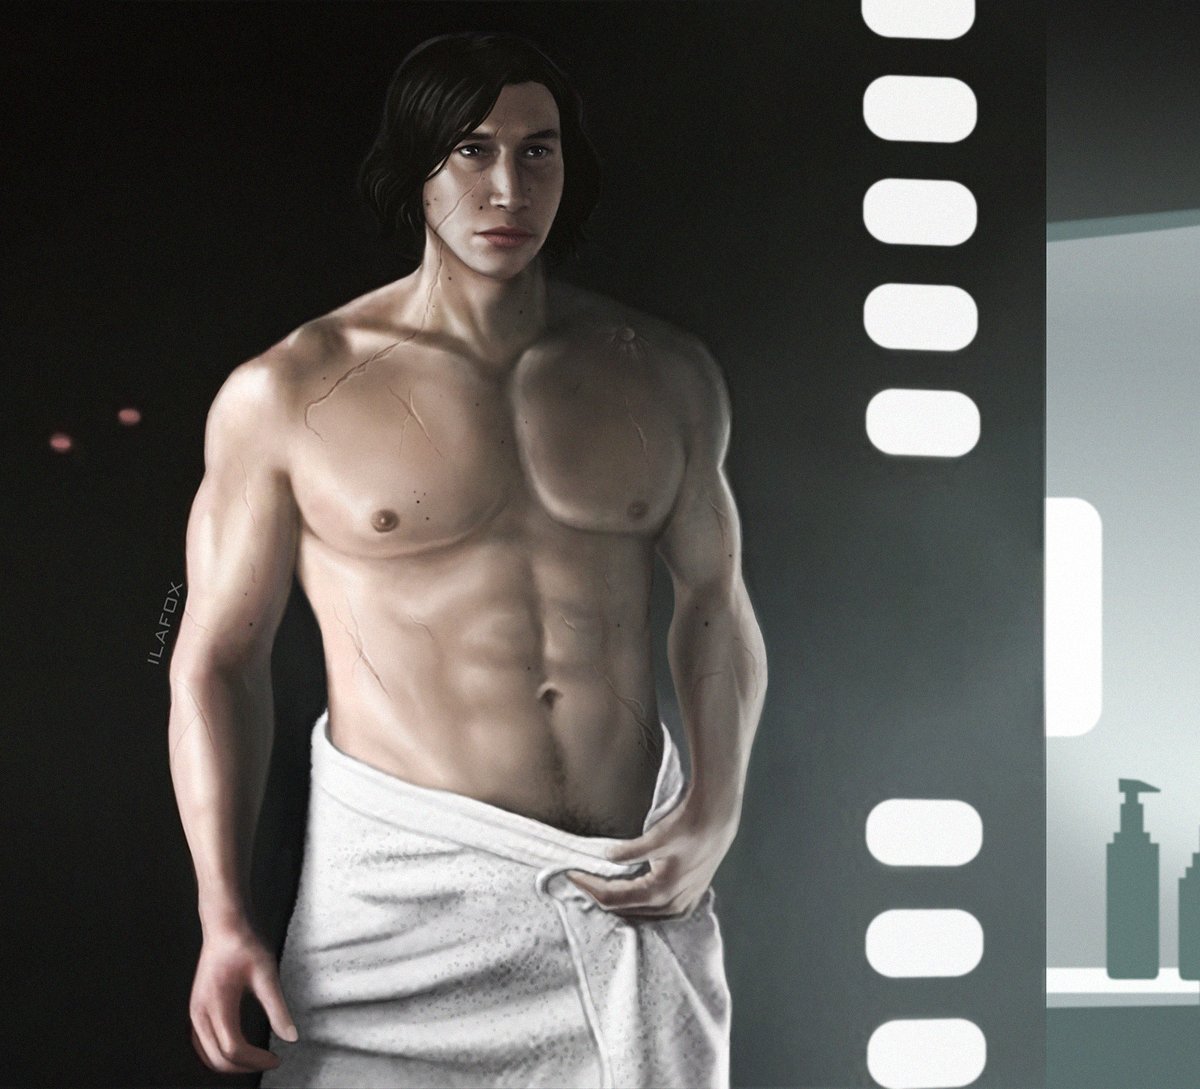 "Good morning," she began thoughtfully, giving Kylo's leg a ...